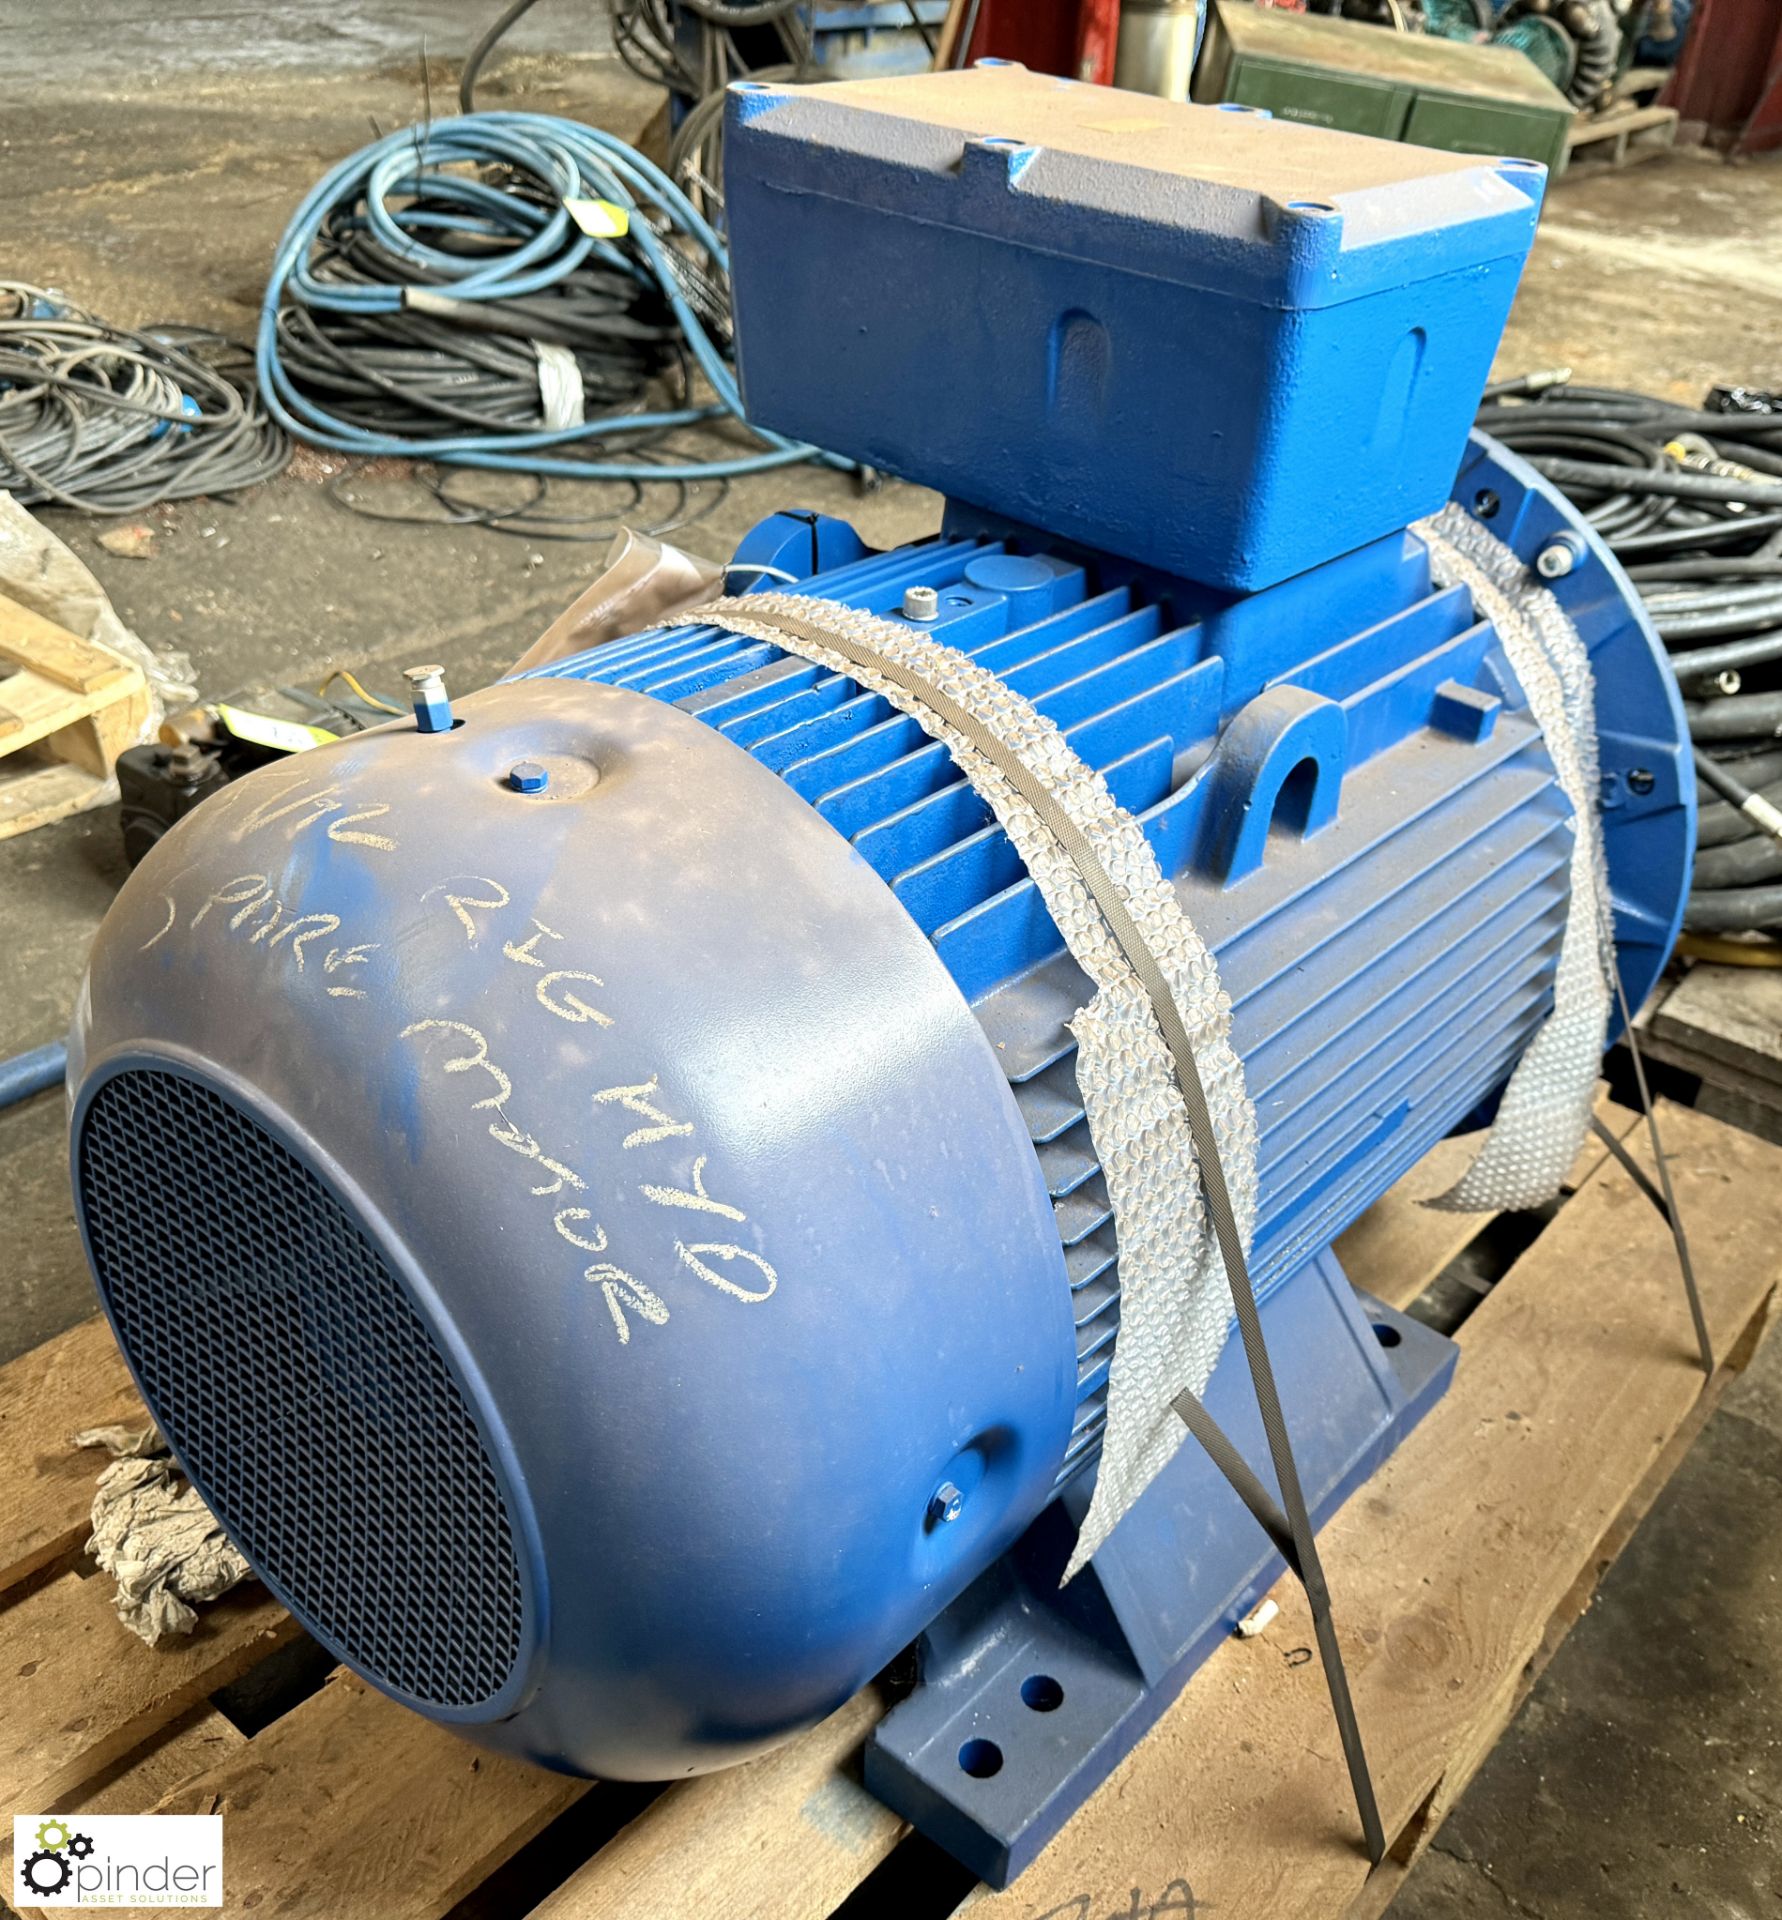 Marelli D5X 280 S4 B35 ATEX Electric Motor, refurbished, unused (LOCATION: Nottingham – collection - Image 3 of 5